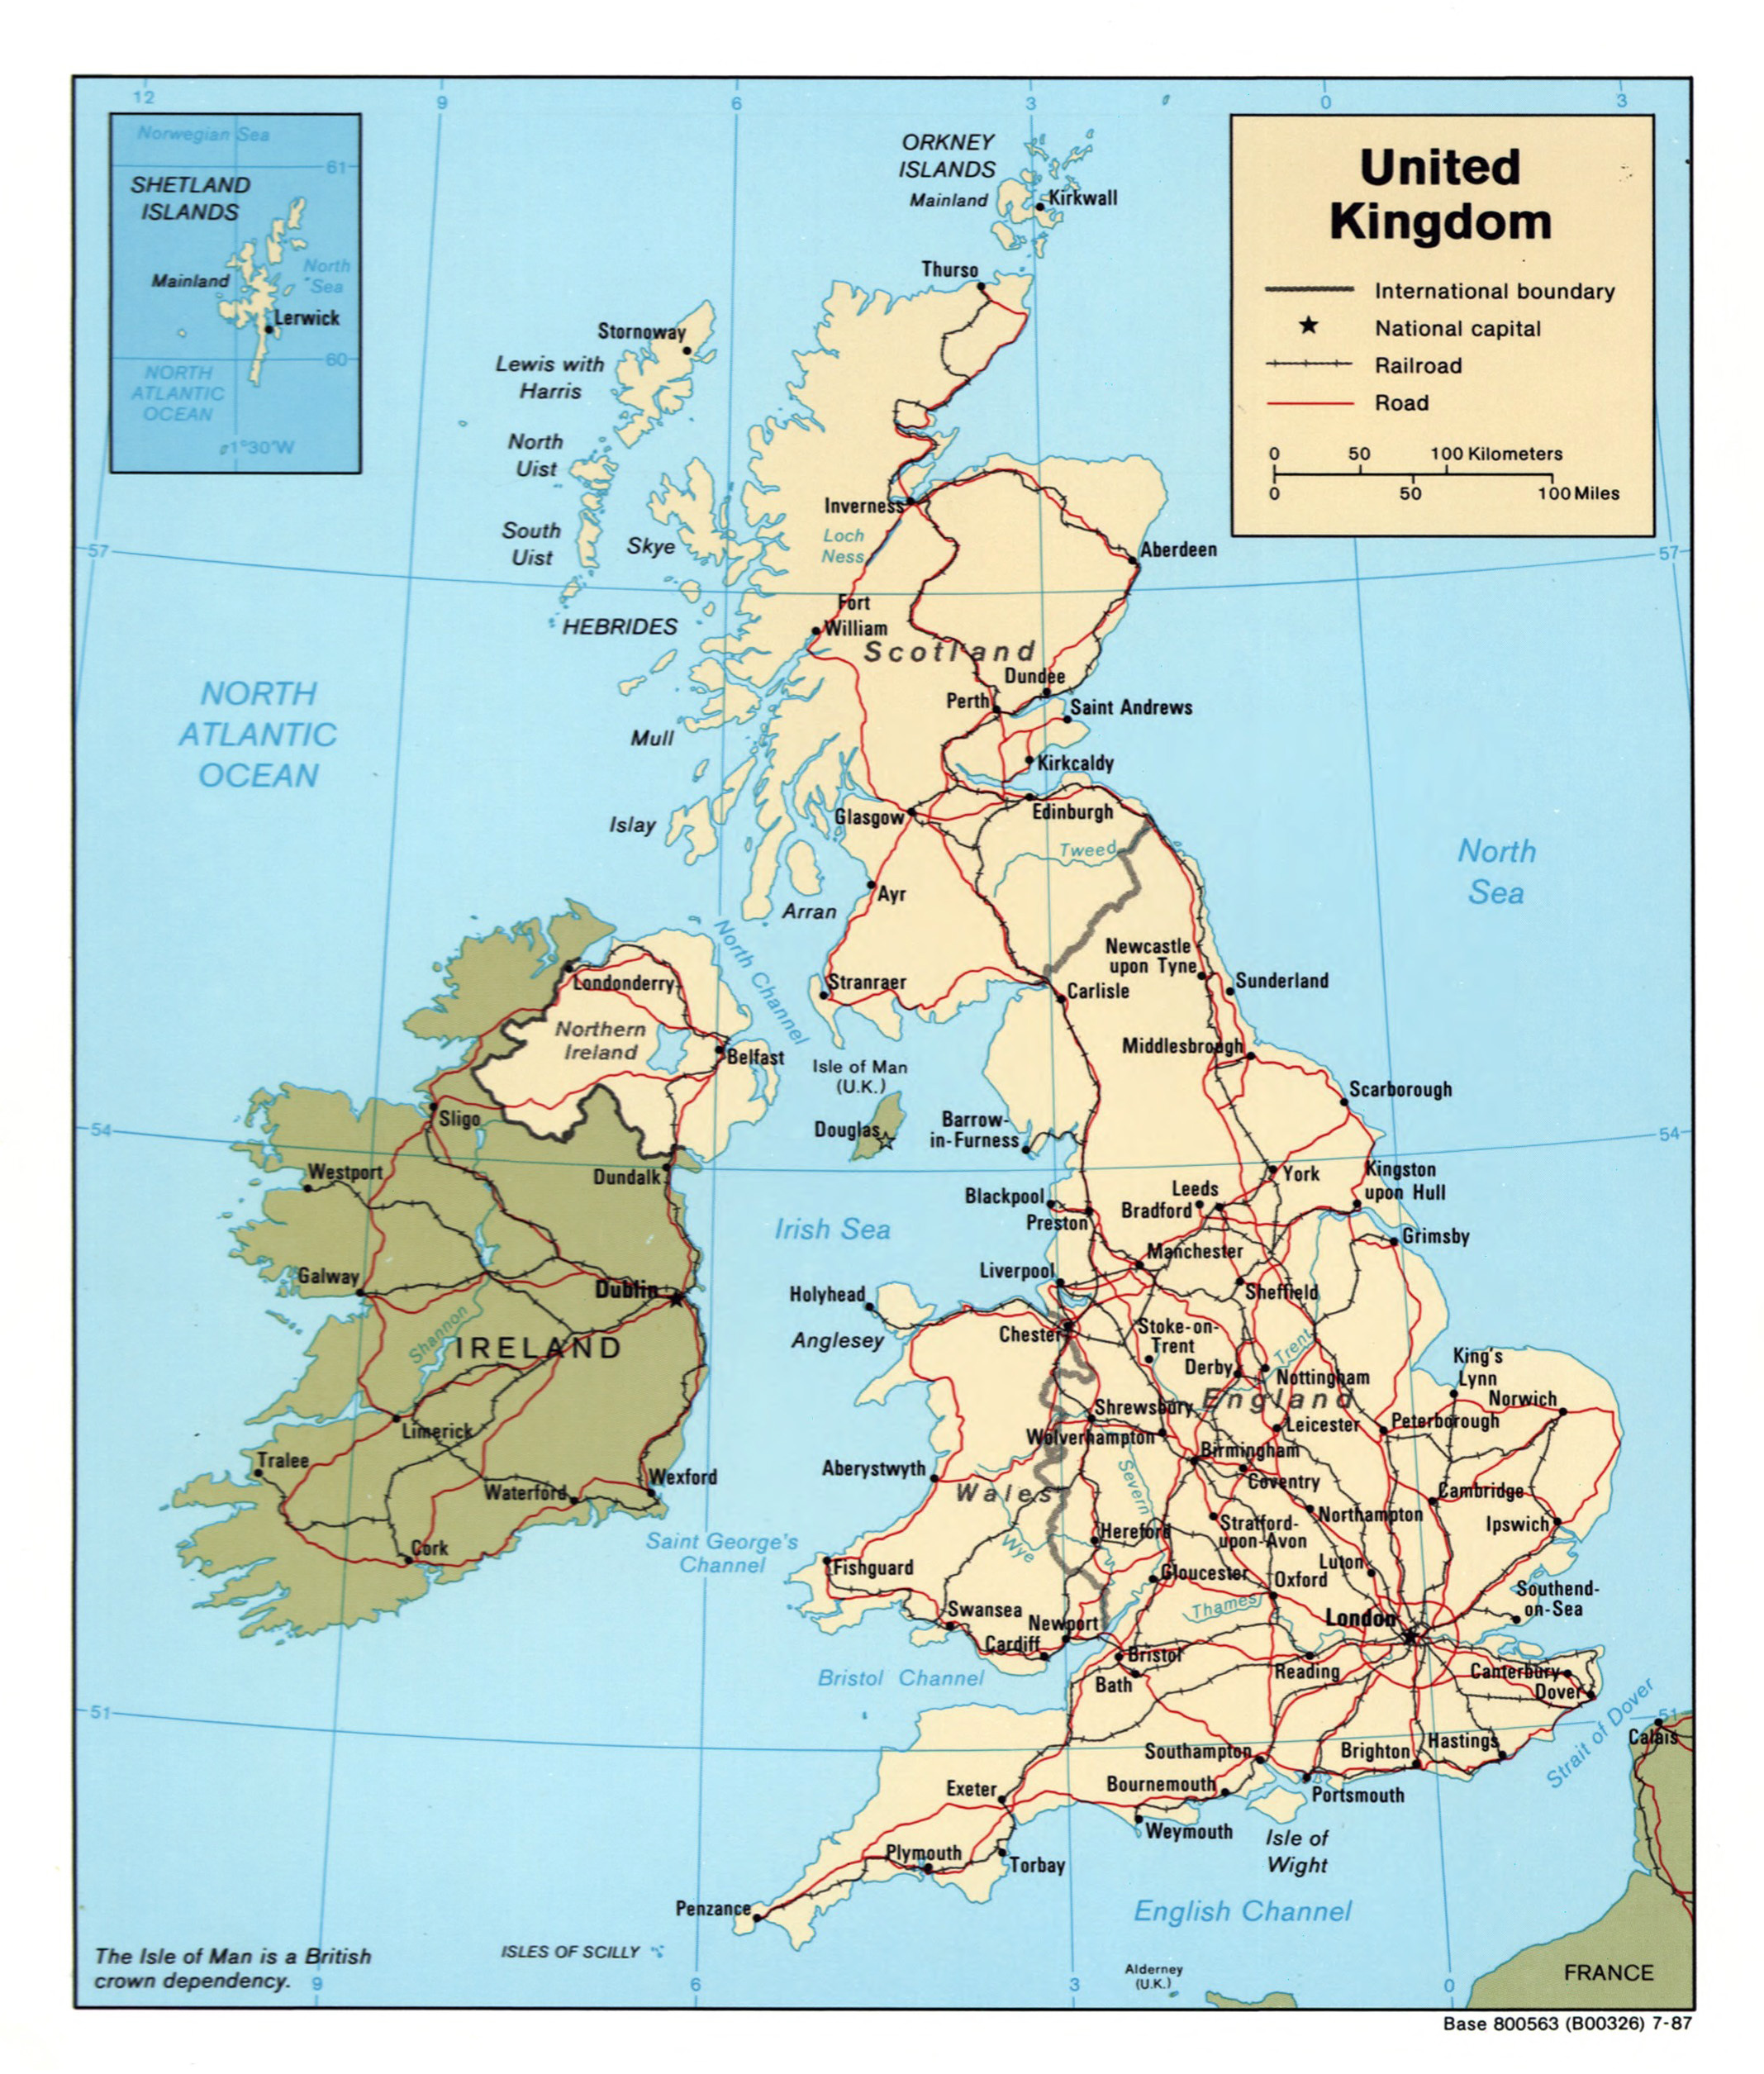 Large Detailed Physical Map Of United Kingdom With All Roads Cities Images Sexiz Pix